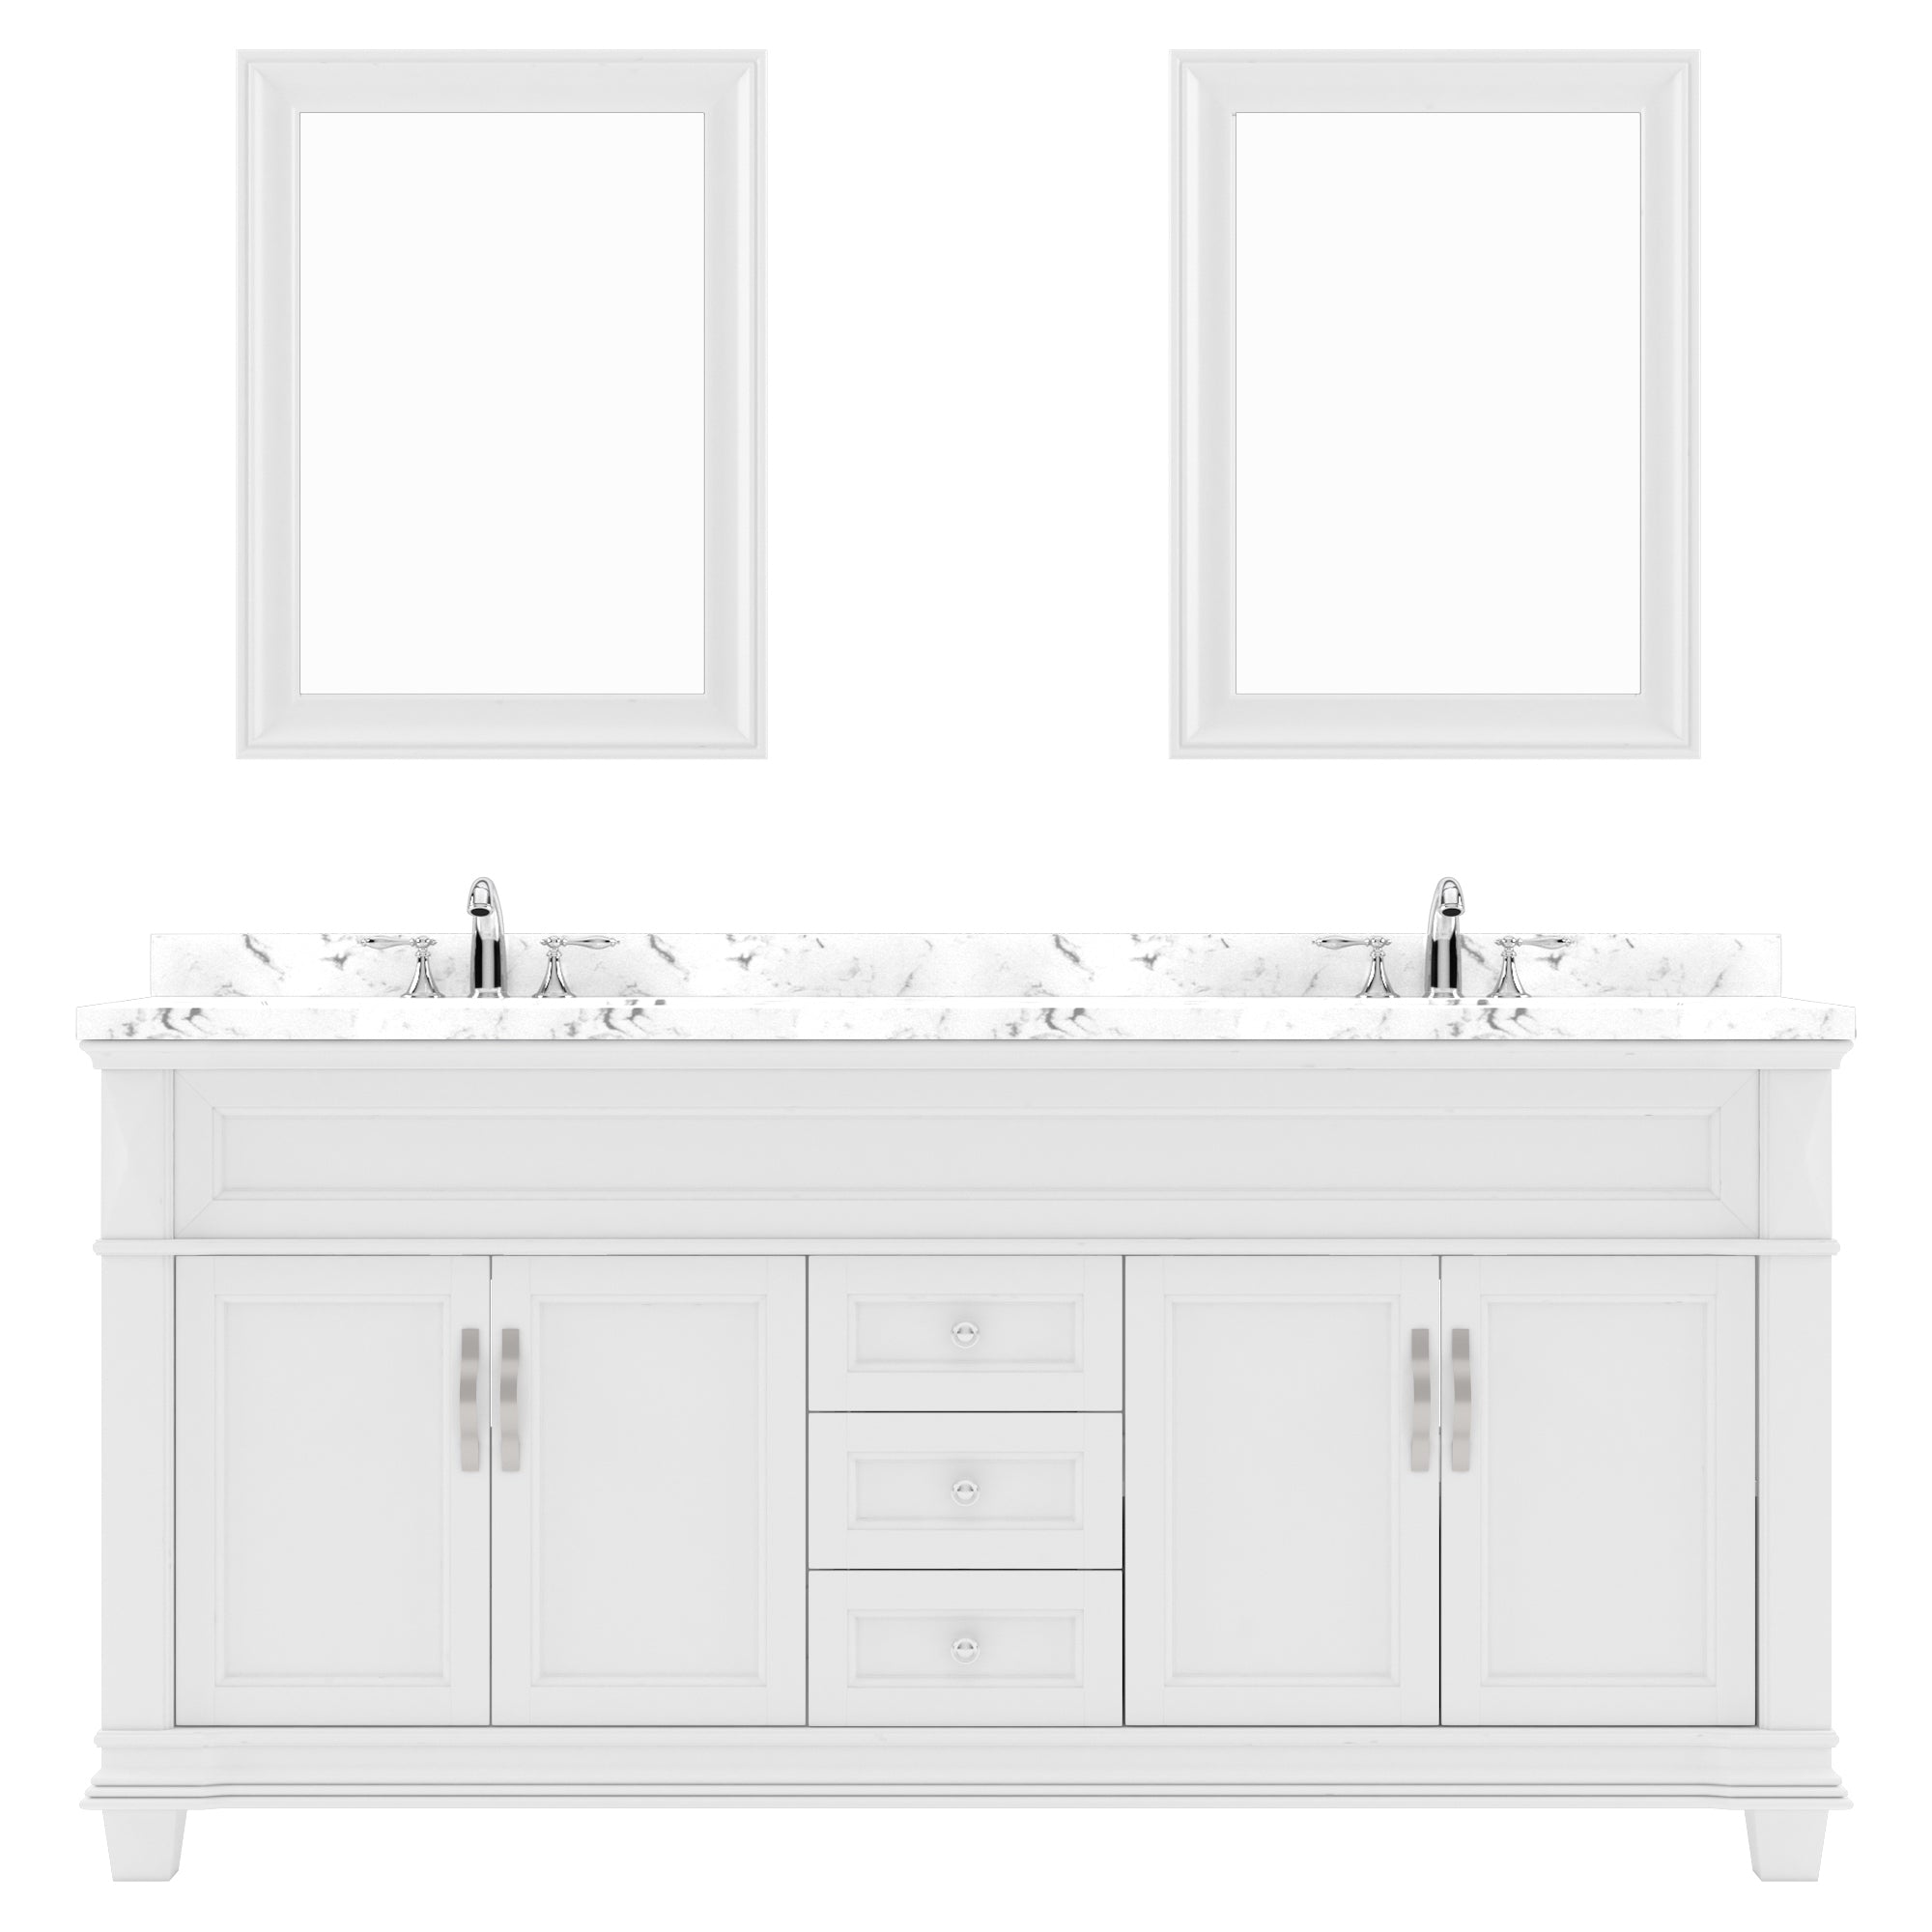 Dual Marble and Brass Sink Vanity with Marble Shelf - Transitional